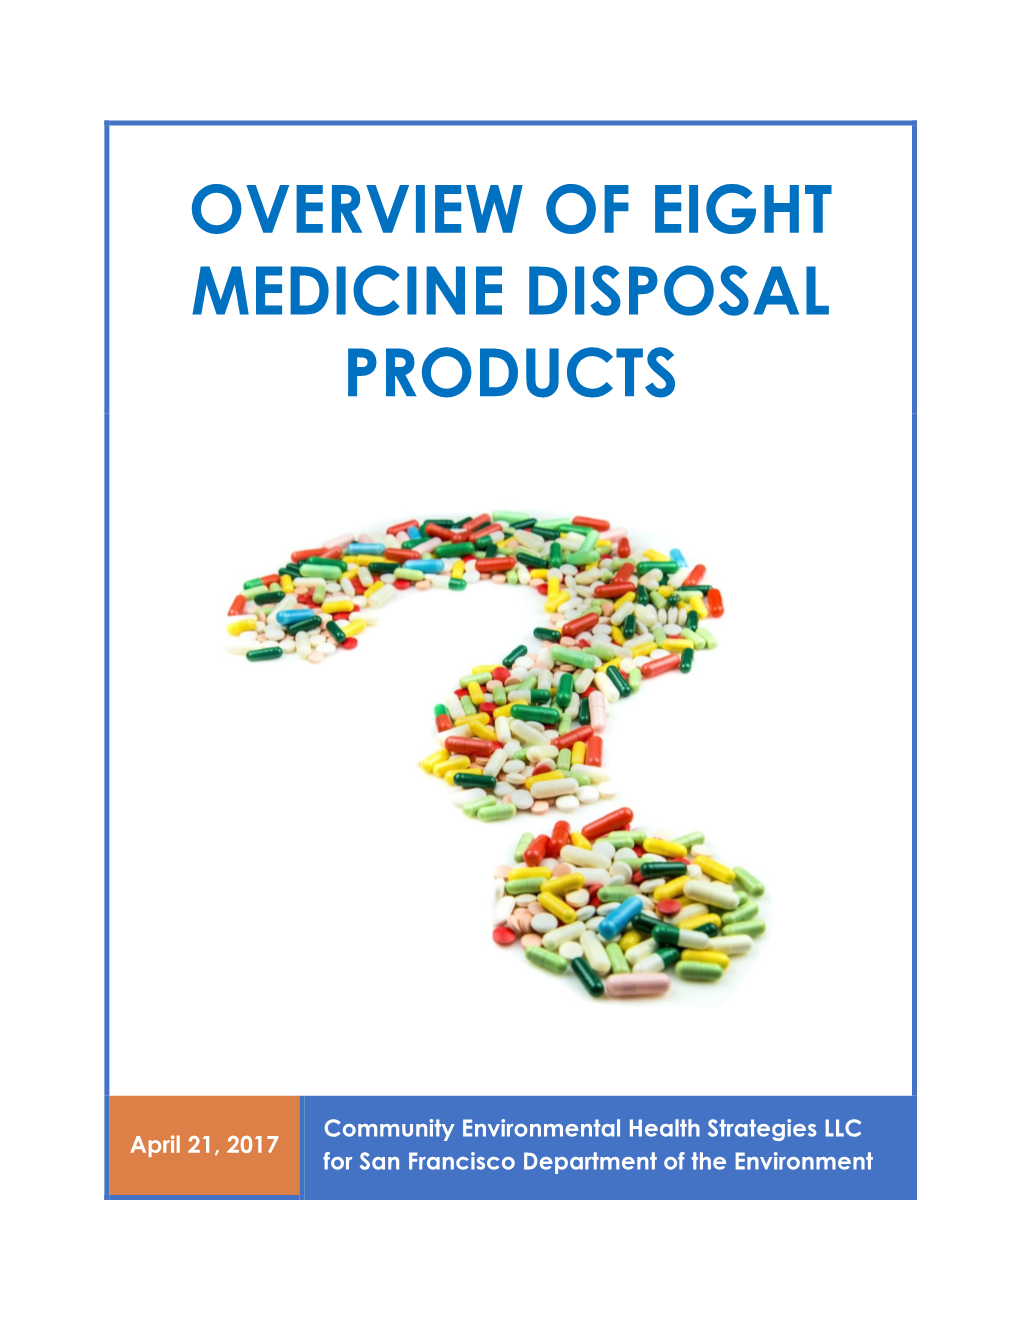 Overview of Eight Medicine Disposal Products